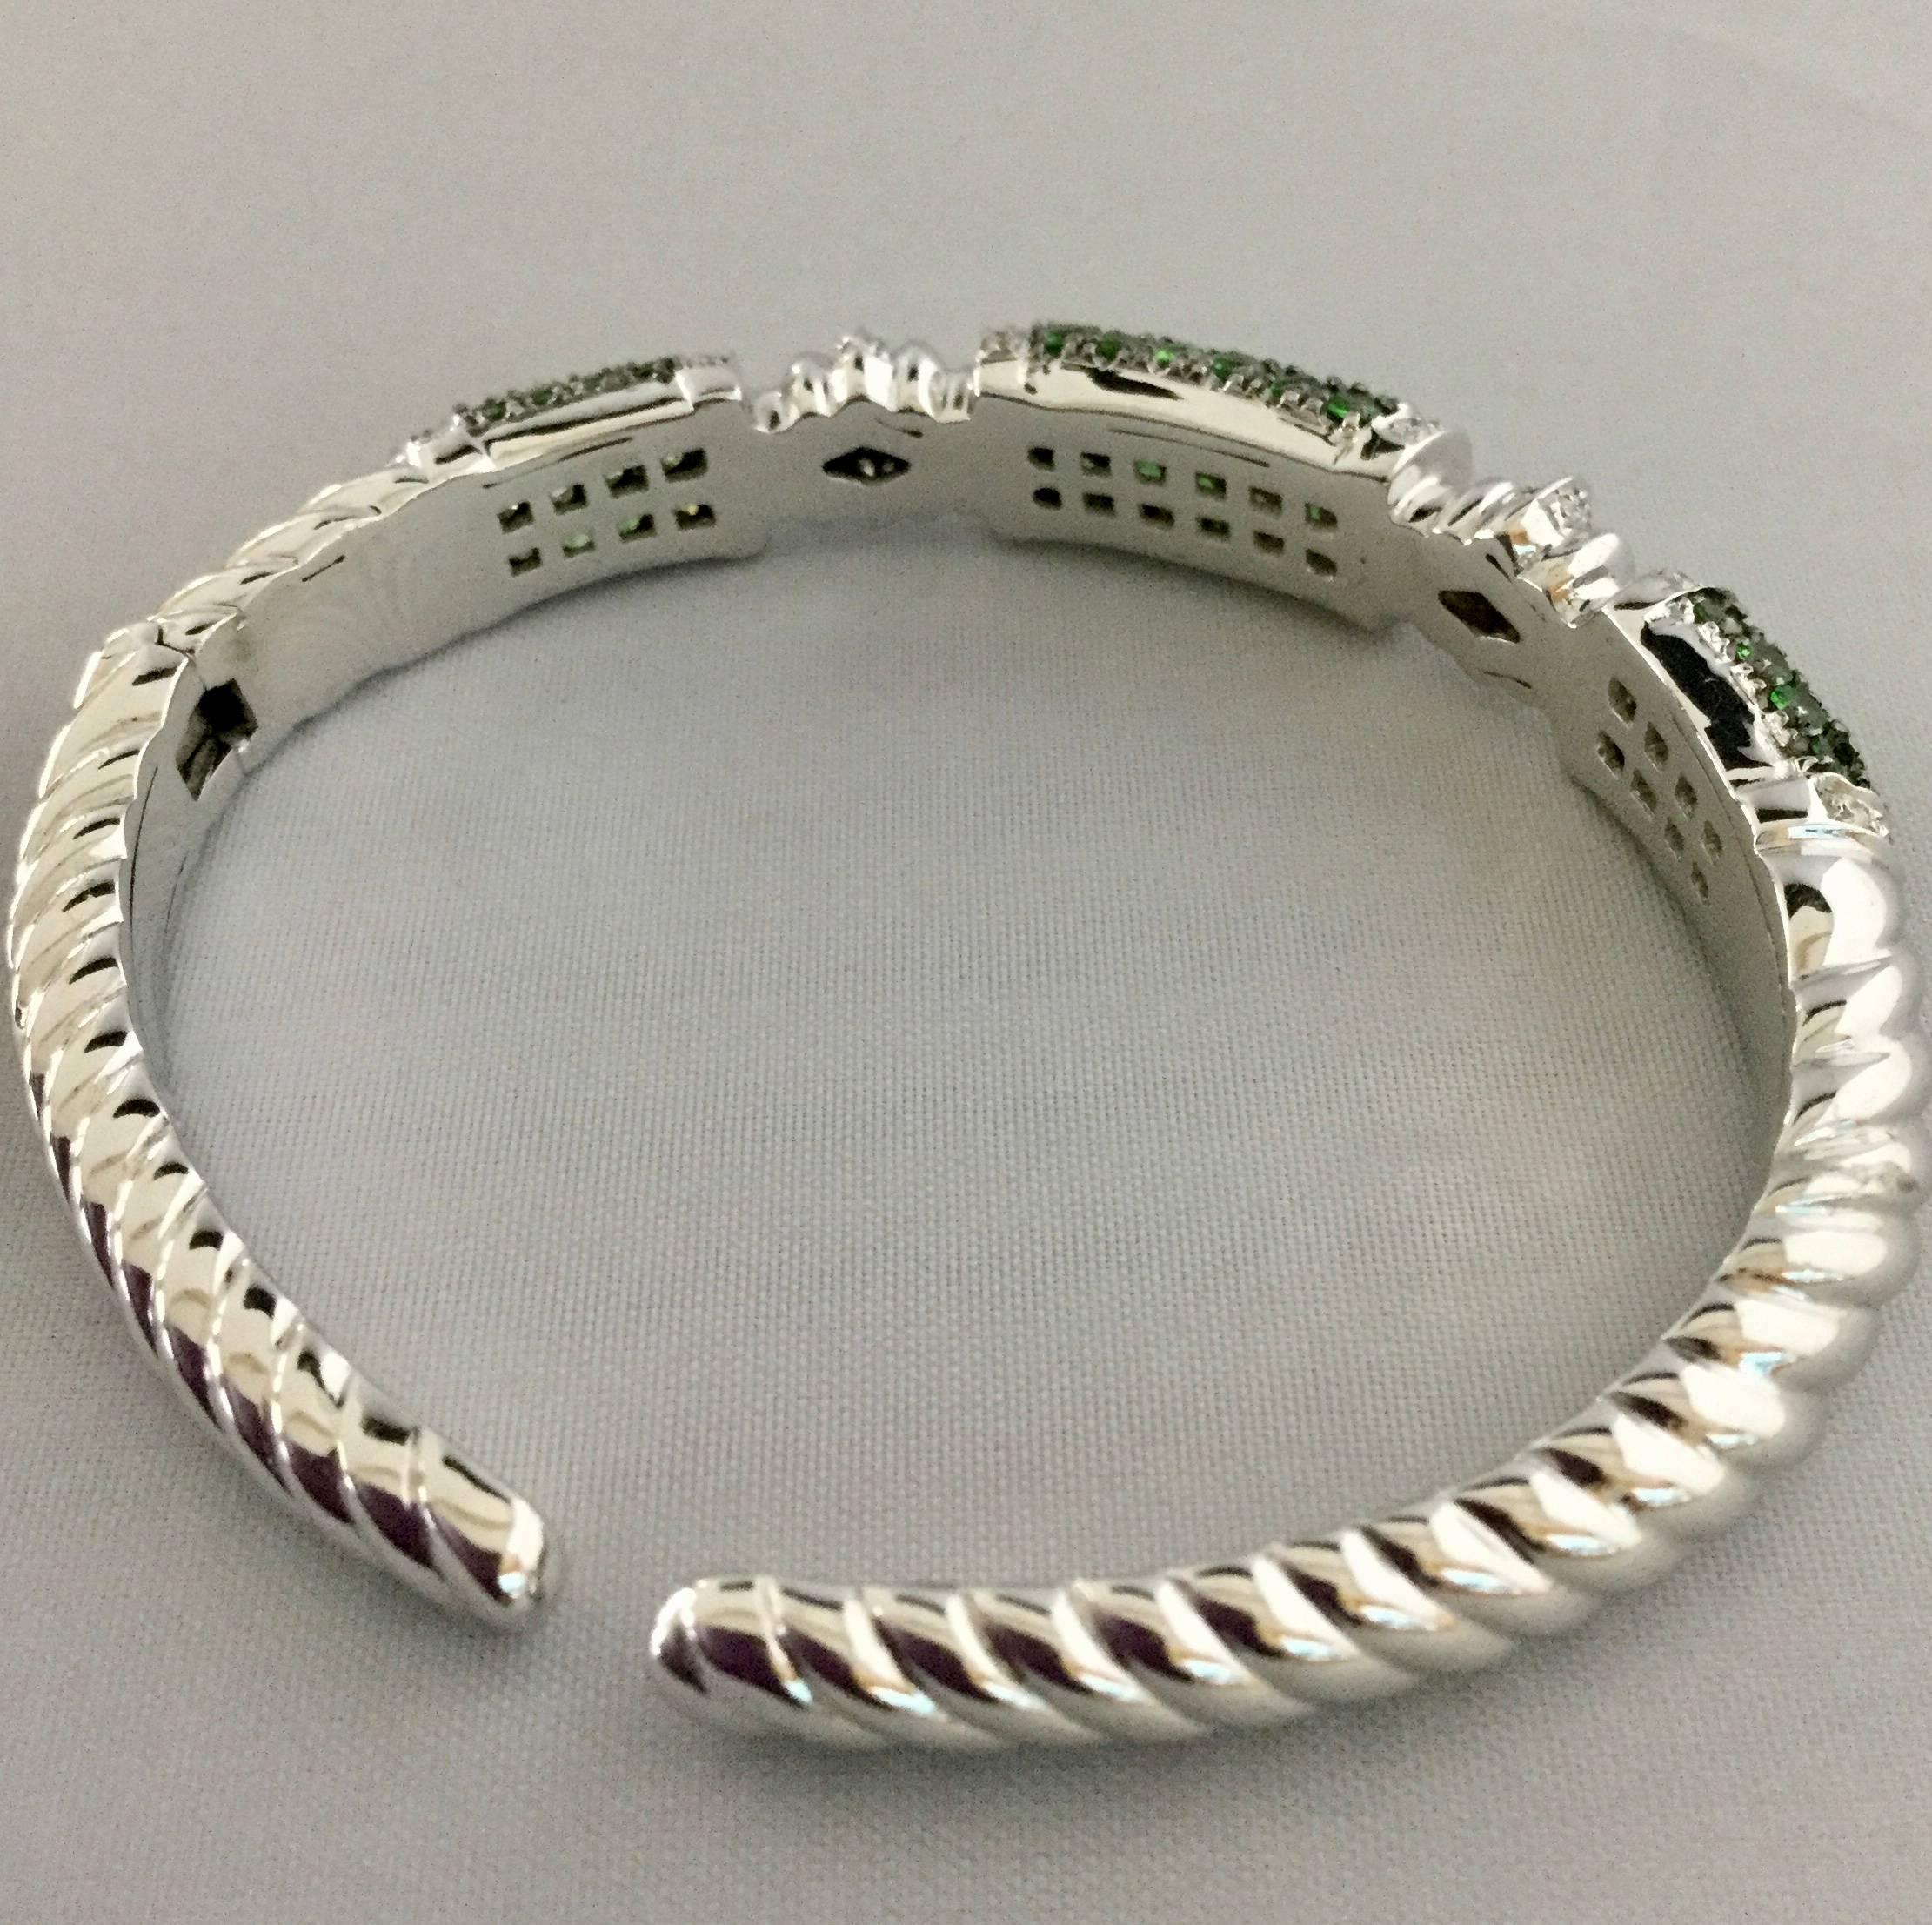 18K white gold hinged cuff bracelet with tsavorite and diamonds.The bracelet contains 56 tsavorite garnets weighing combined 3.30 carats and 58 diamonds weighing combined 0.58 carat.